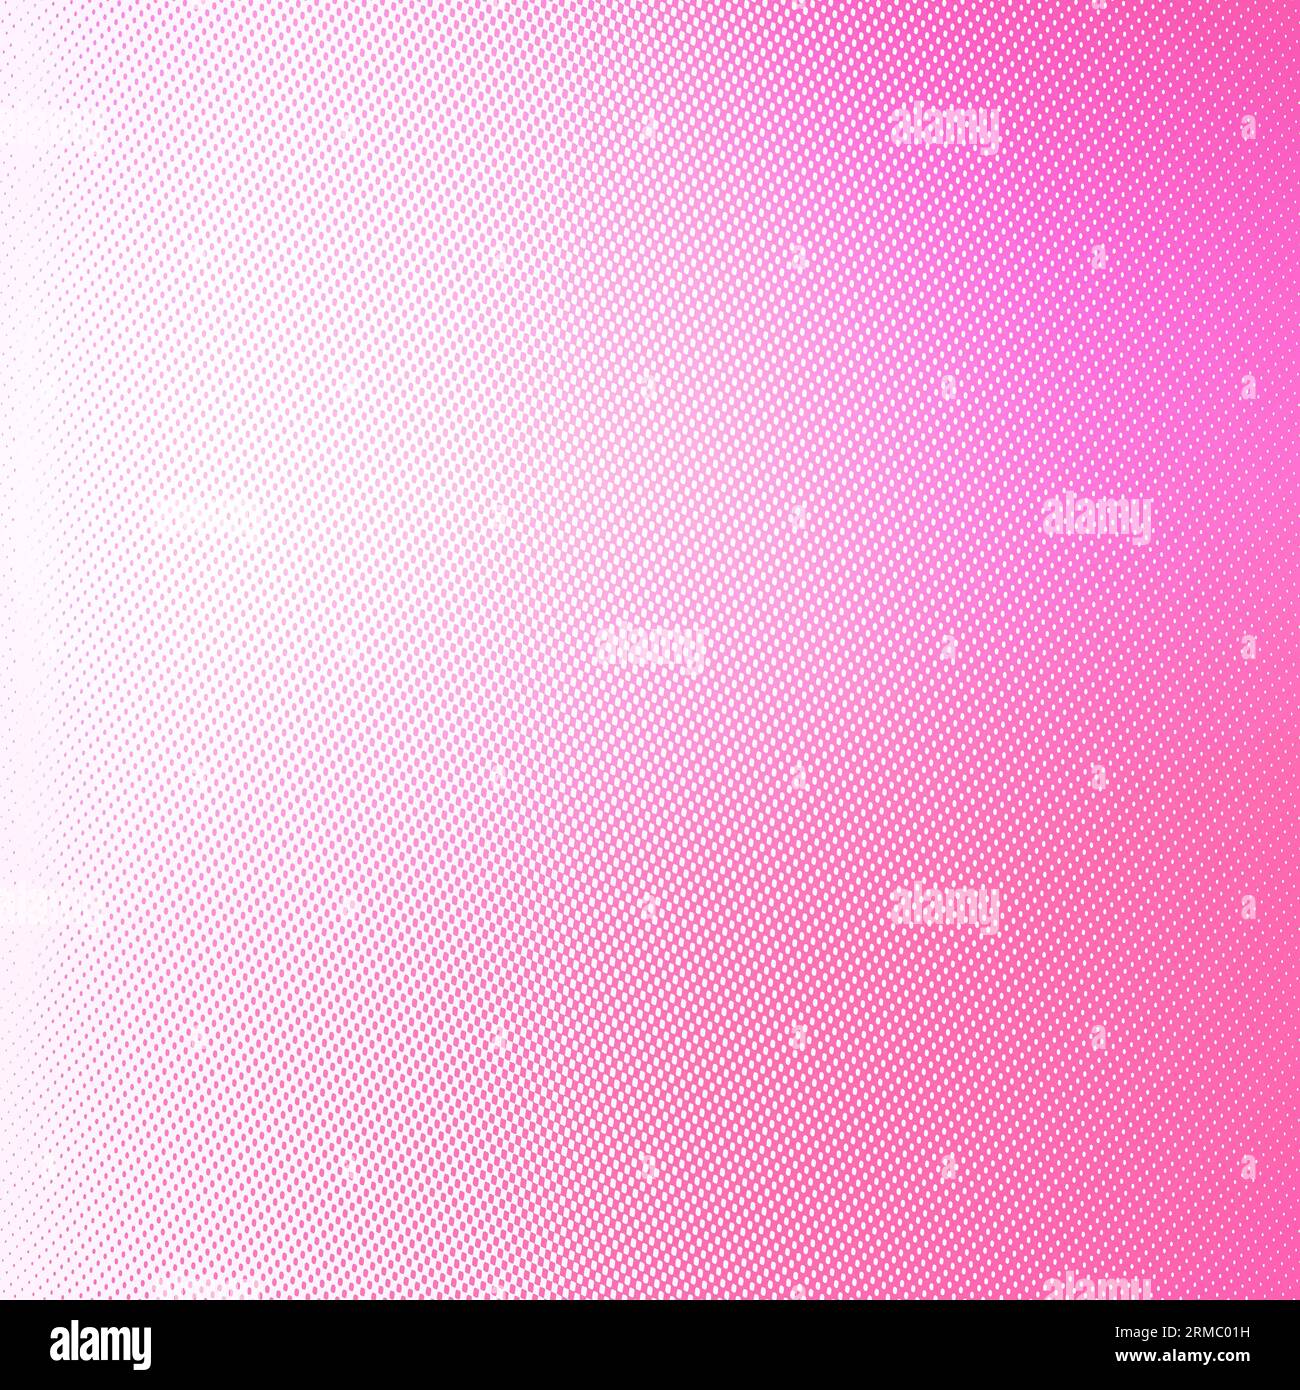 Gradient pink  background. Square backdrop illustration with copy space, Best suitable for online Ads, poster, banner, sale, and design works Stock Photo